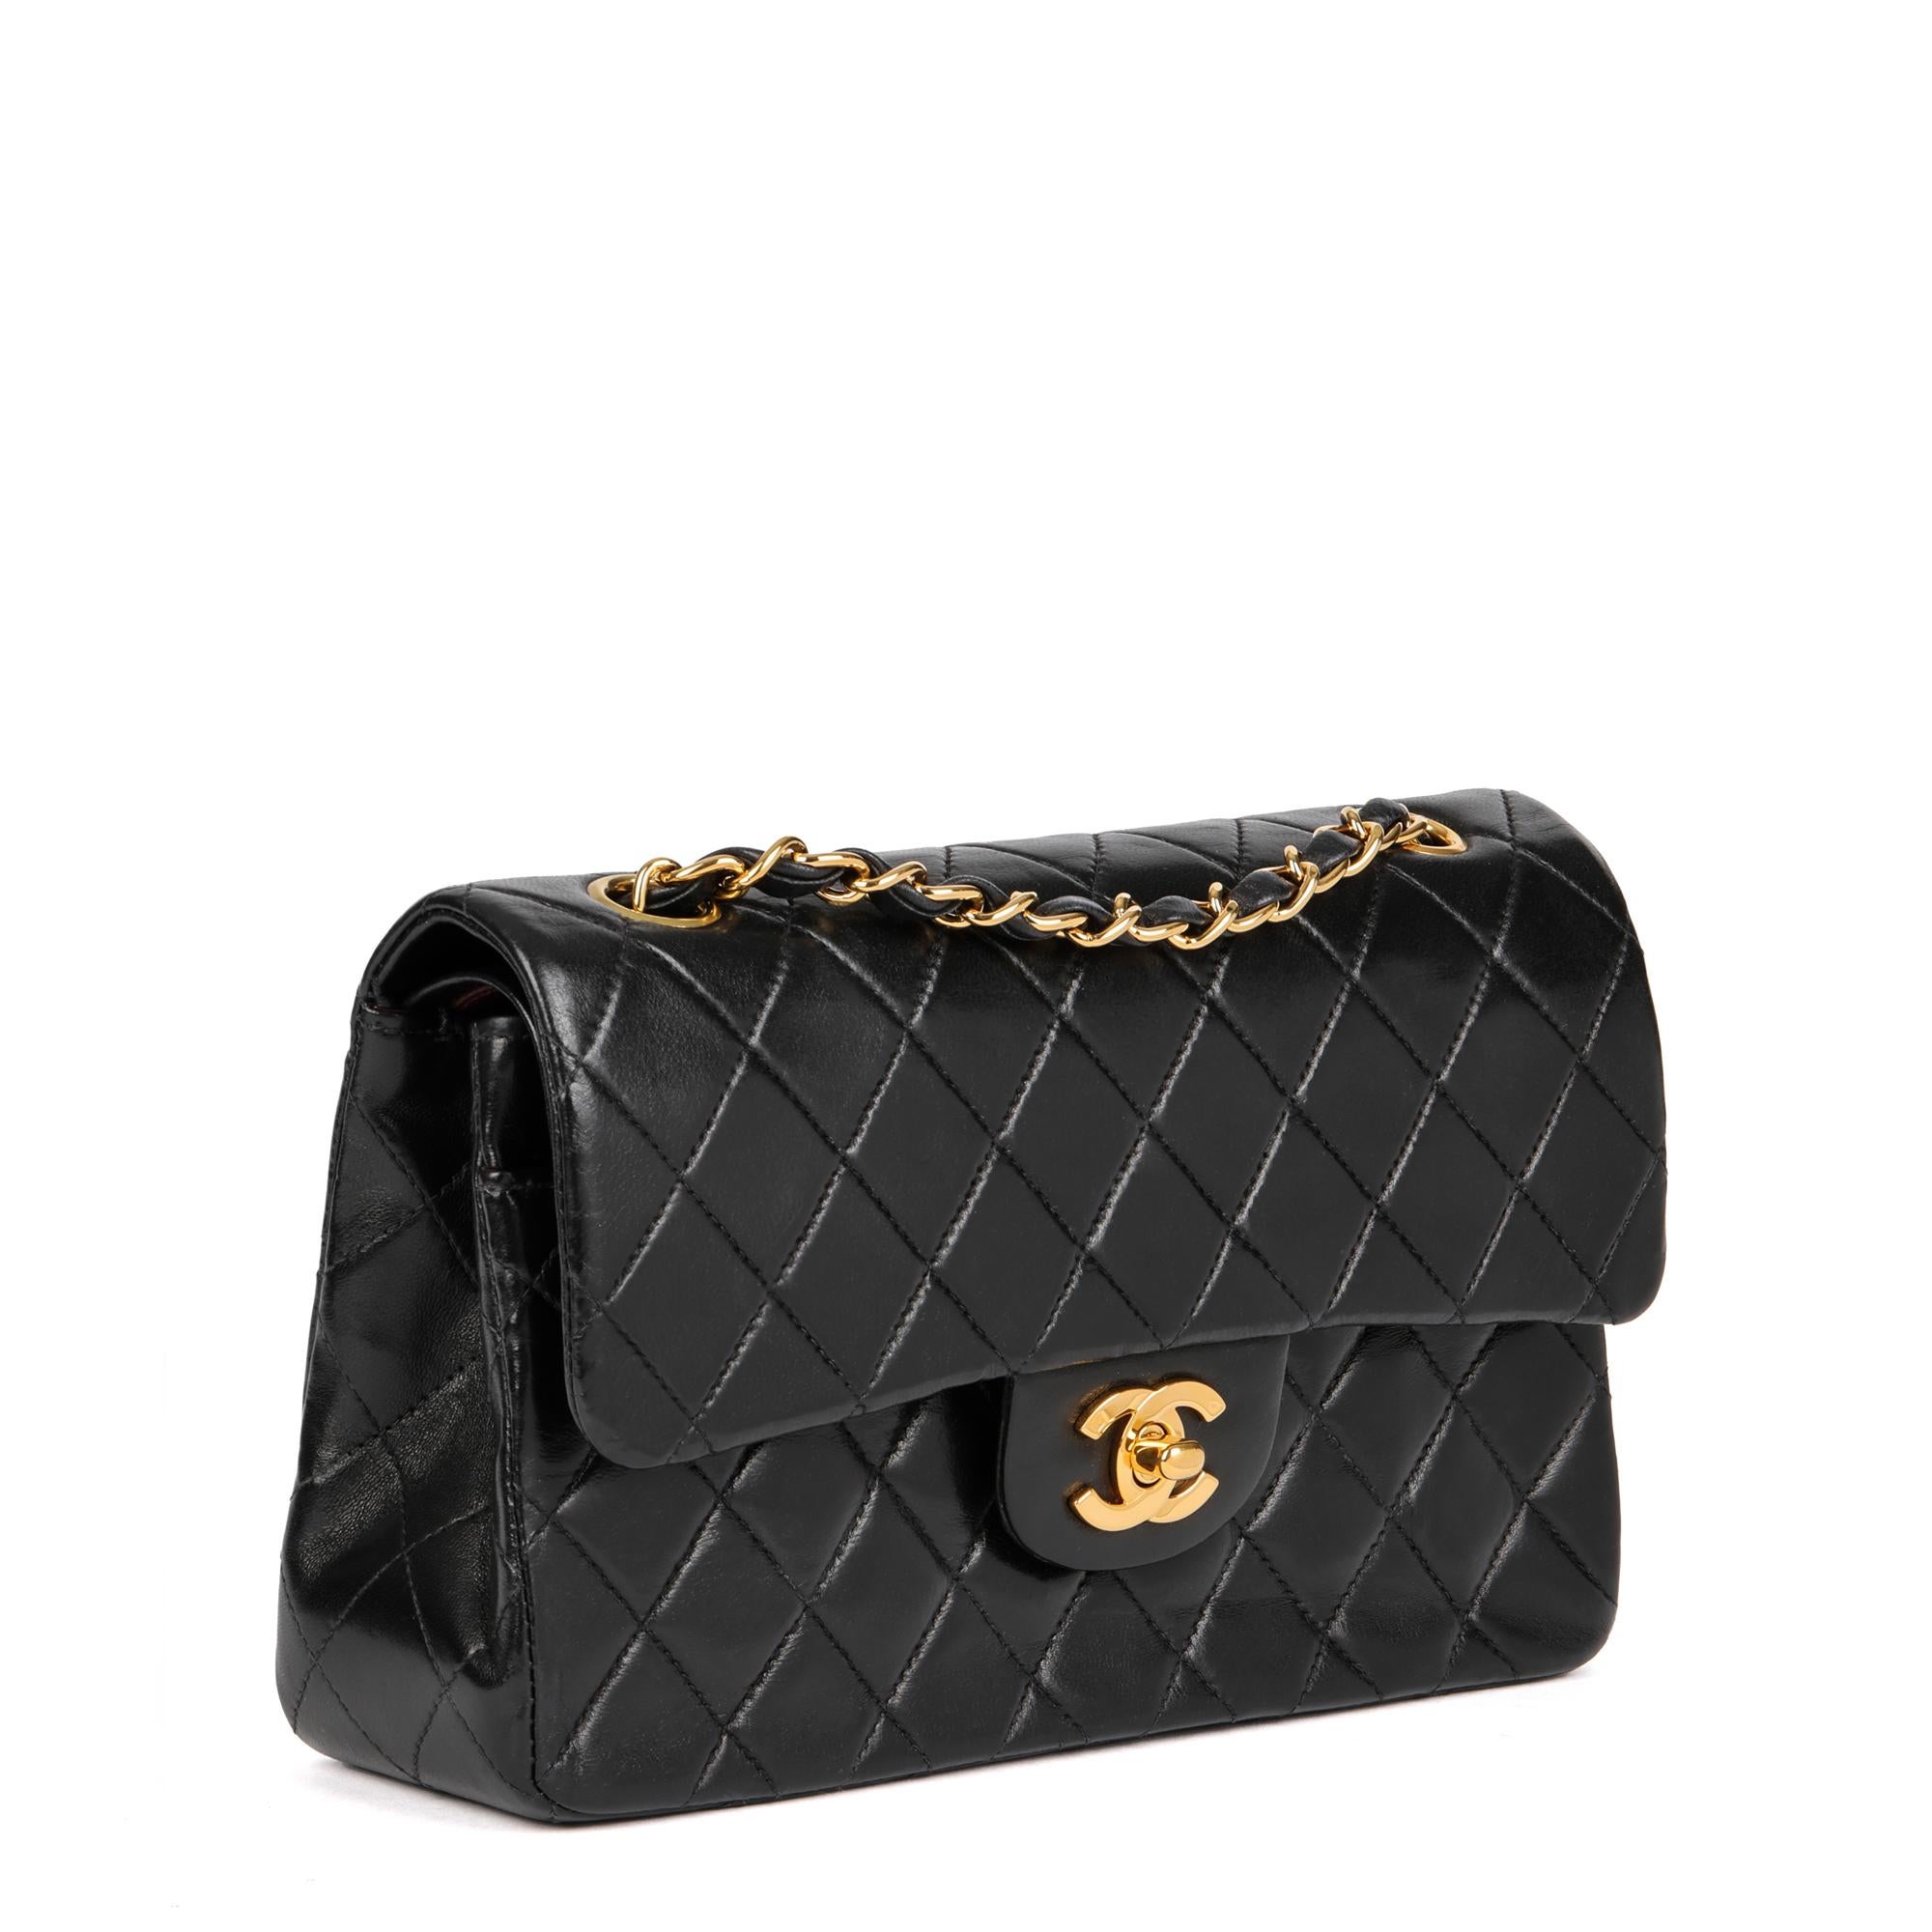 CHANEL
Black Quilted Lambskin Vintage Small Classic Double Flap Bag

Xupes Reference: HB4592
Serial Number: 7056530
Age (Circa): 2002
Accompanied By: Authenticity Card
Authenticity Details: Authenticity Card, Serial Sticker (Made in France)
Gender: